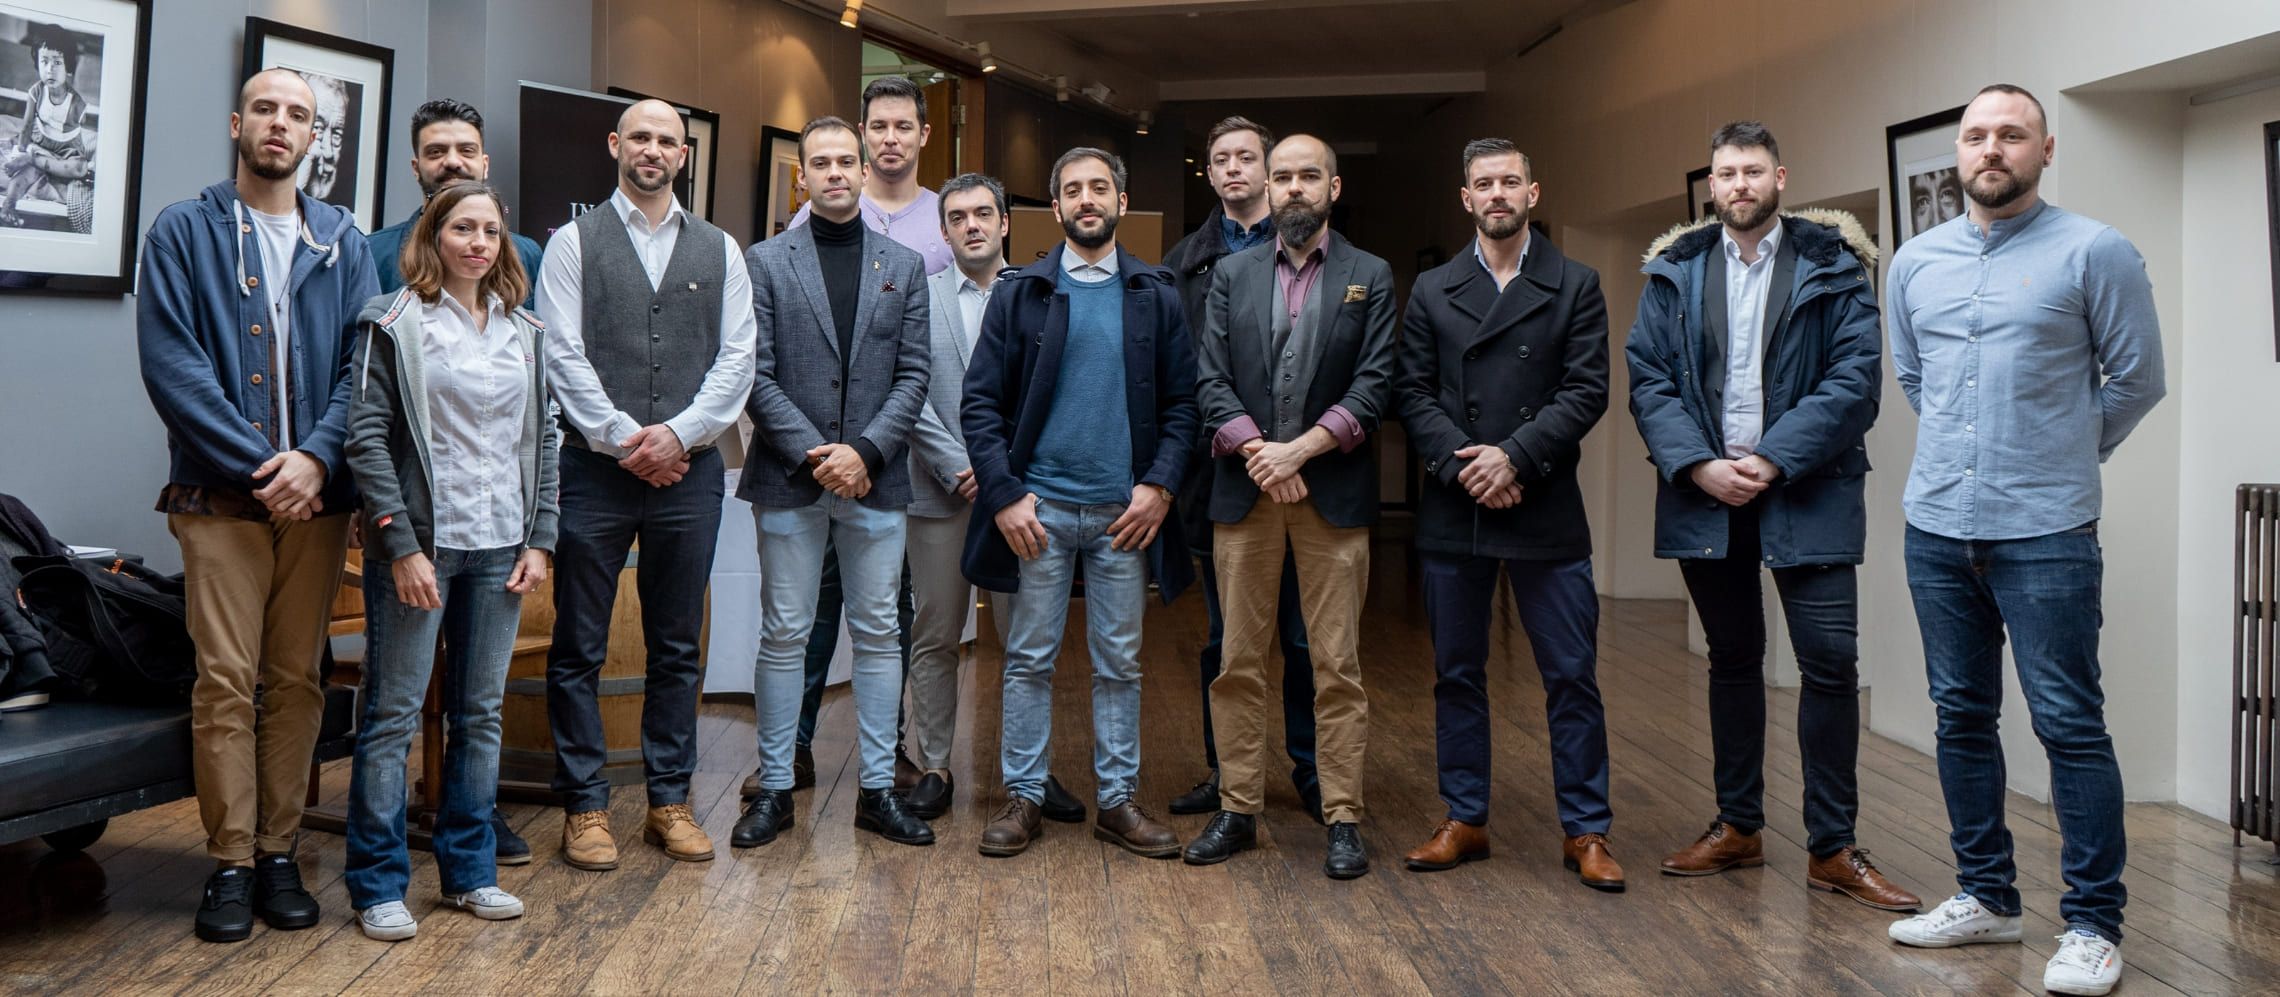 Photo for: 2019 London Spirits Competition Judges